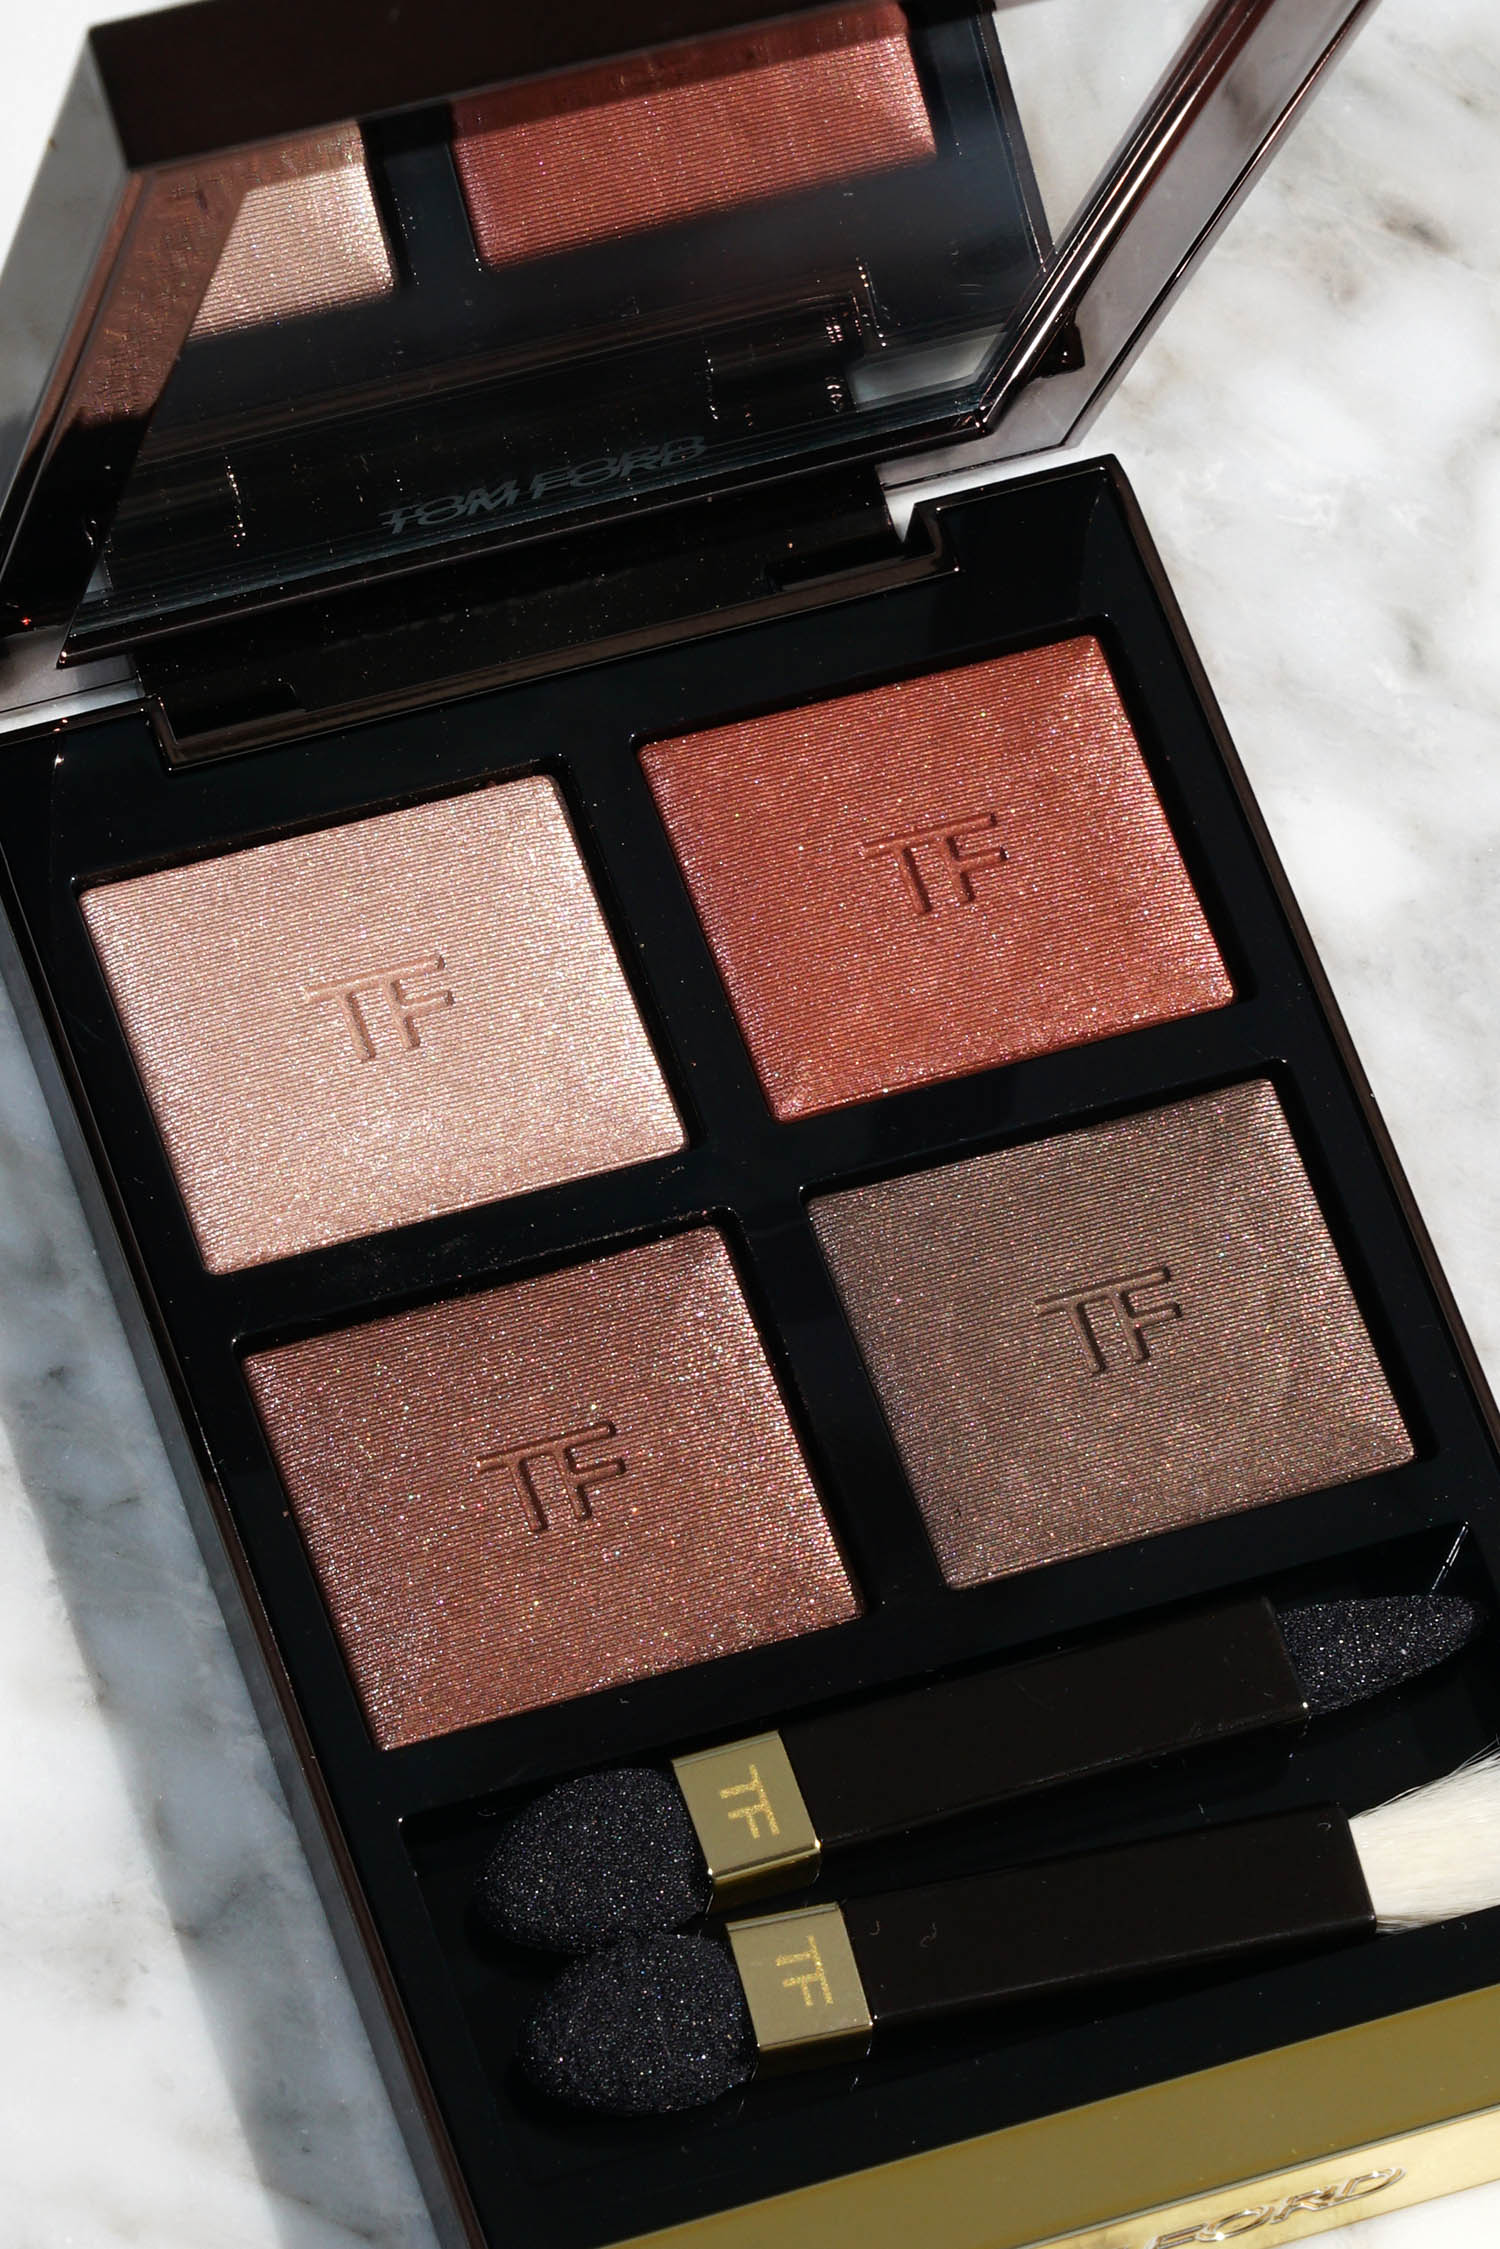 New Tom Ford Eye Color Quads Body Heat, Indemnity, Suspicion Emotionproof Picks - The Beauty Look Book